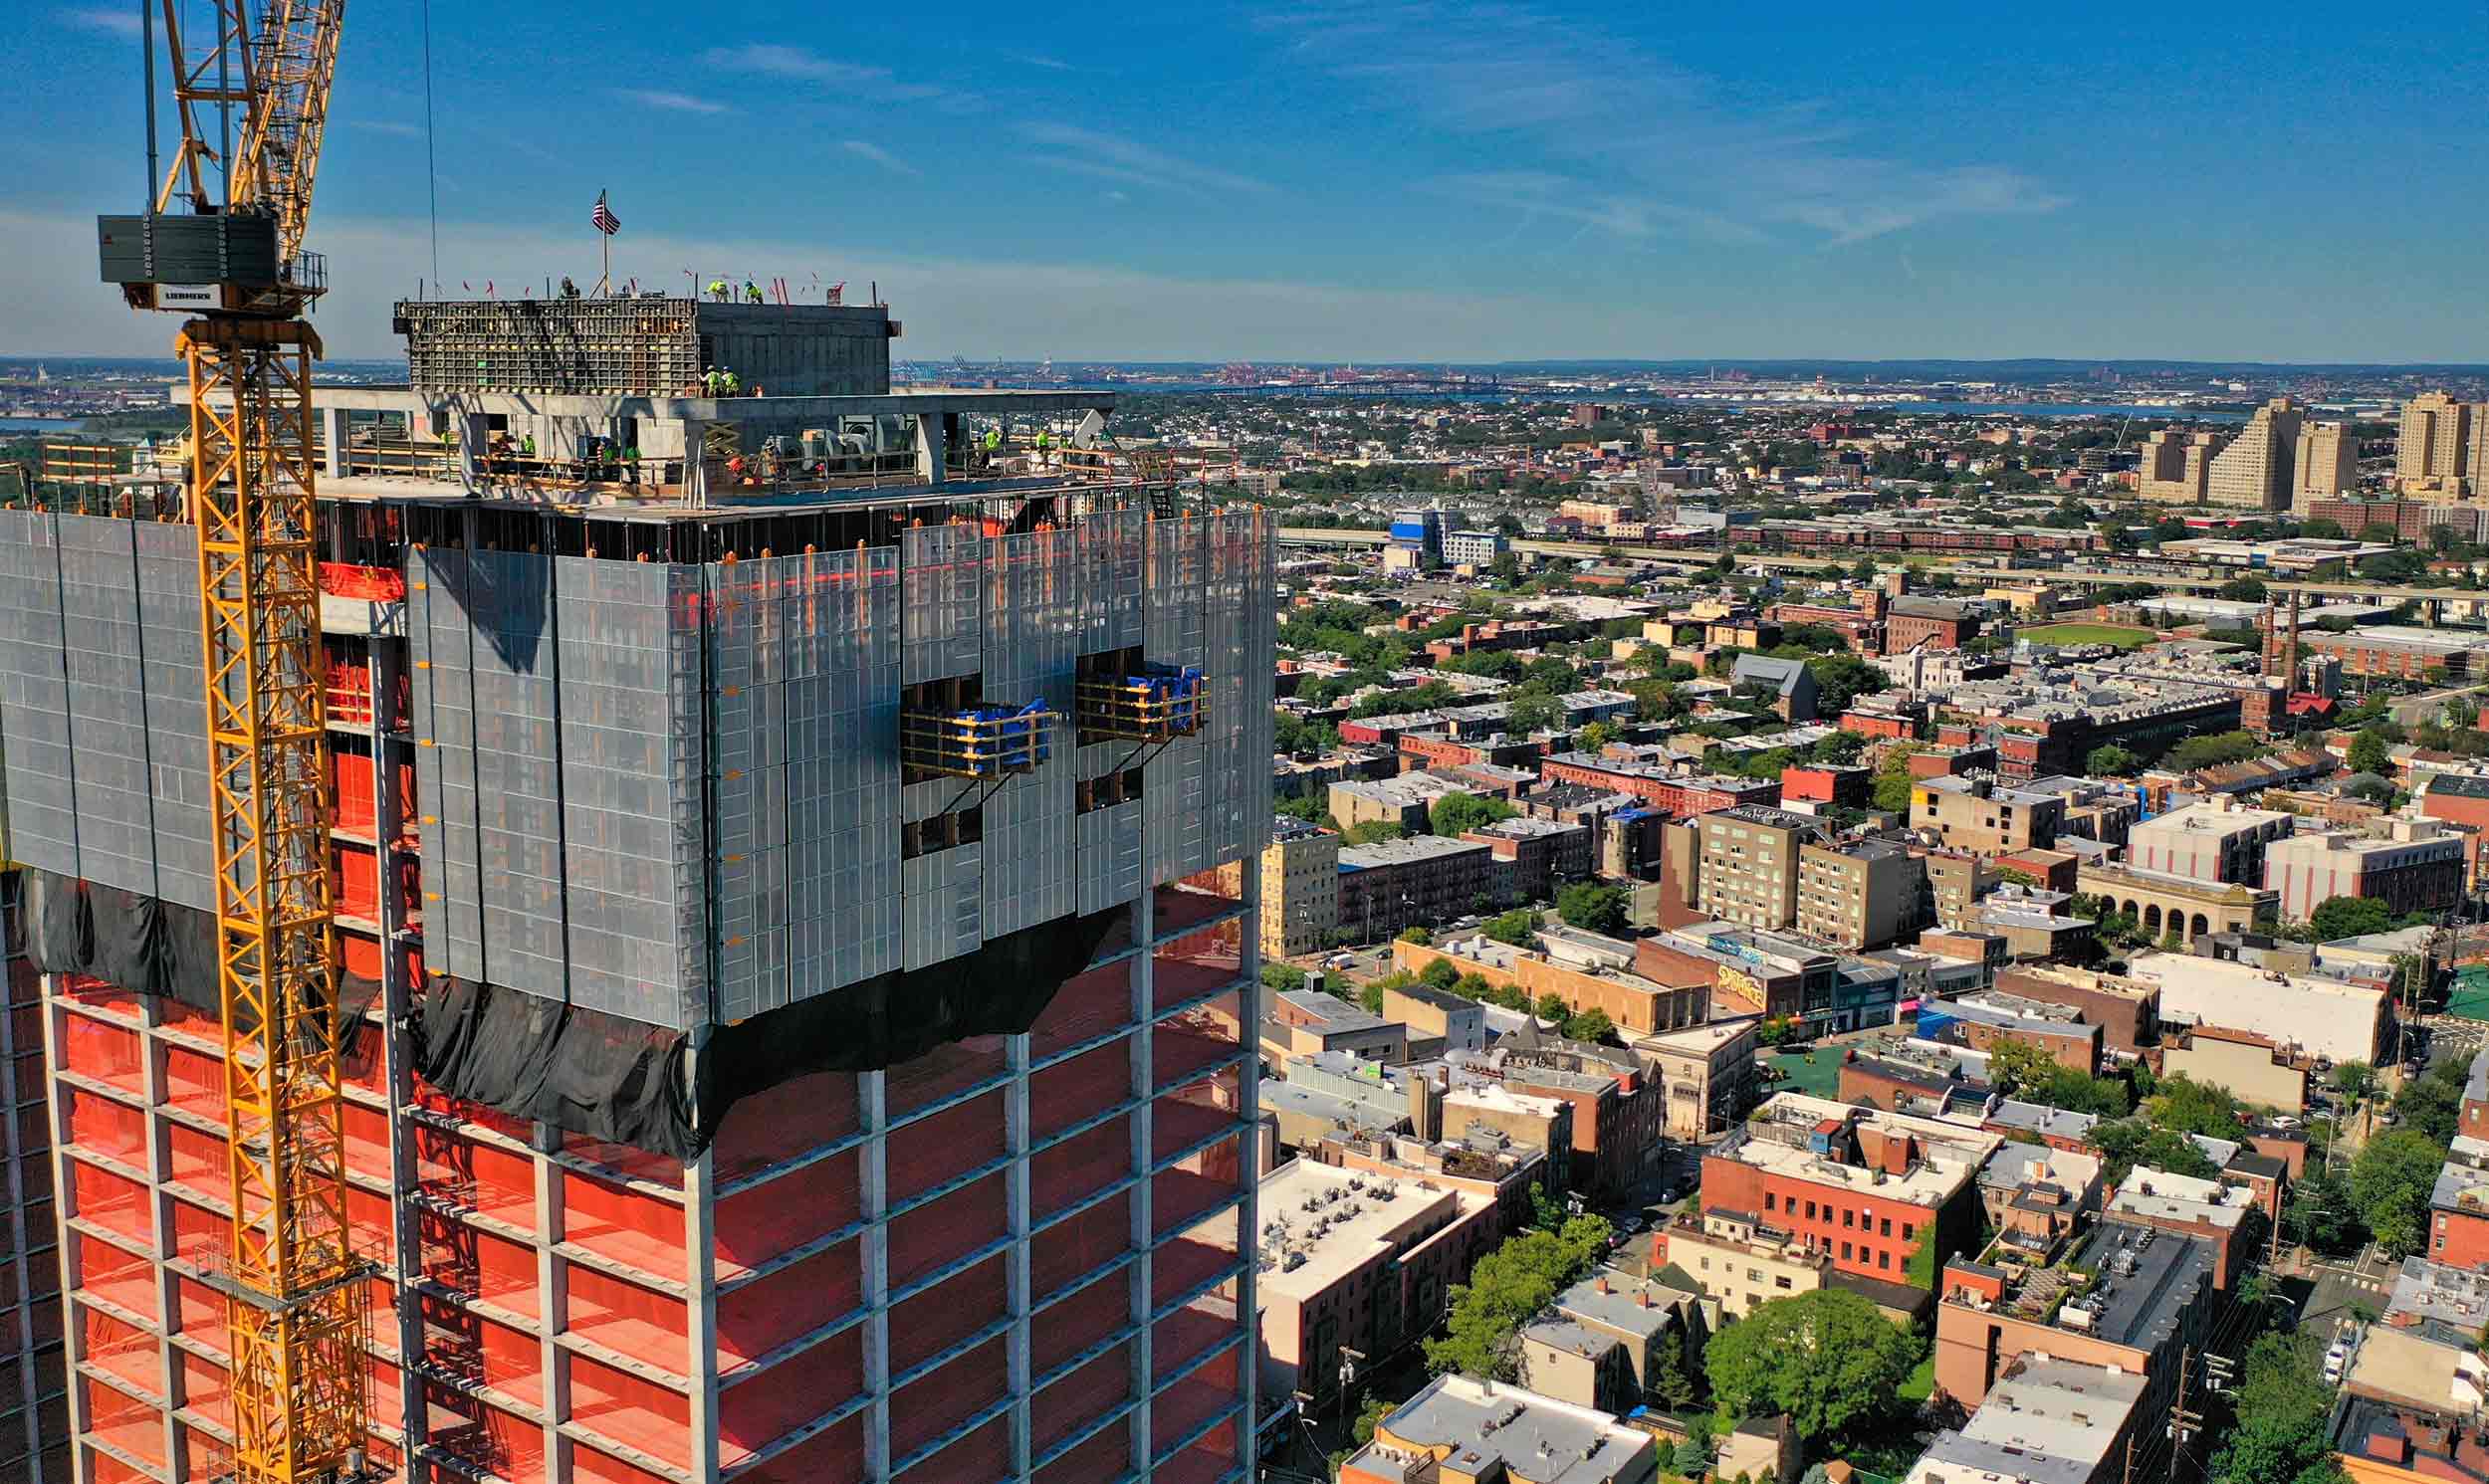 351 Marin Blvd. is a mixed-use project located in the heart of downtown Jersey City in New Jersey. The tower will have 507 apartments, including 8,000 ft2. of commercial space.